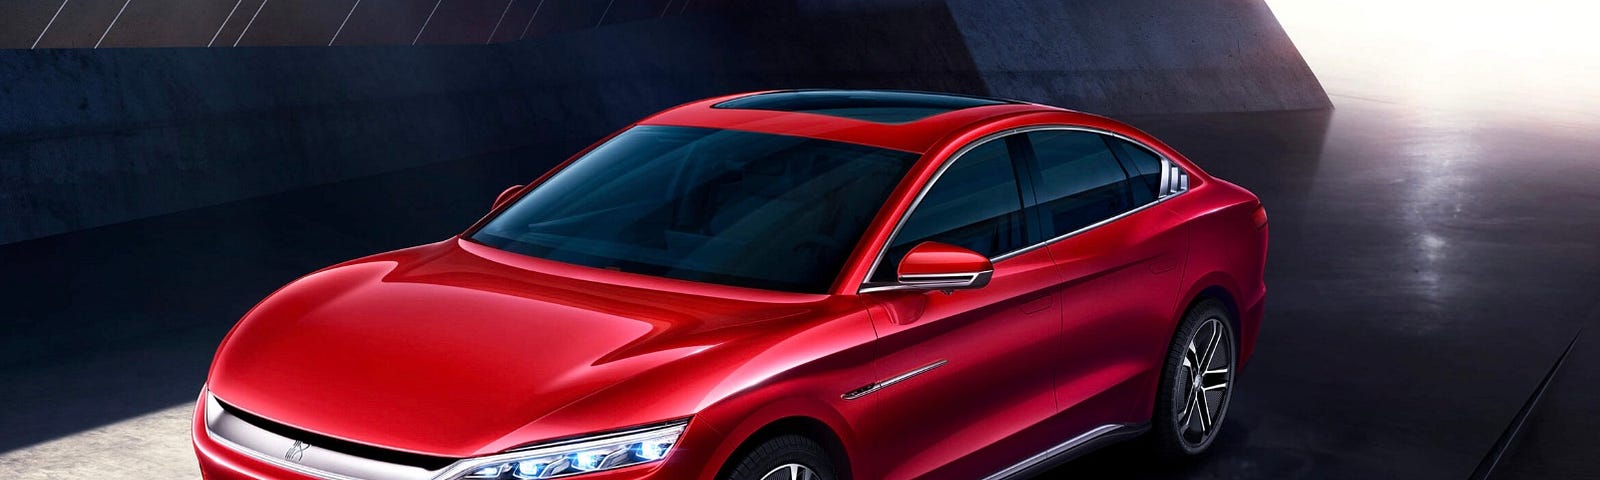 A closer look at a typical BYD electric vehicle in the color of red.